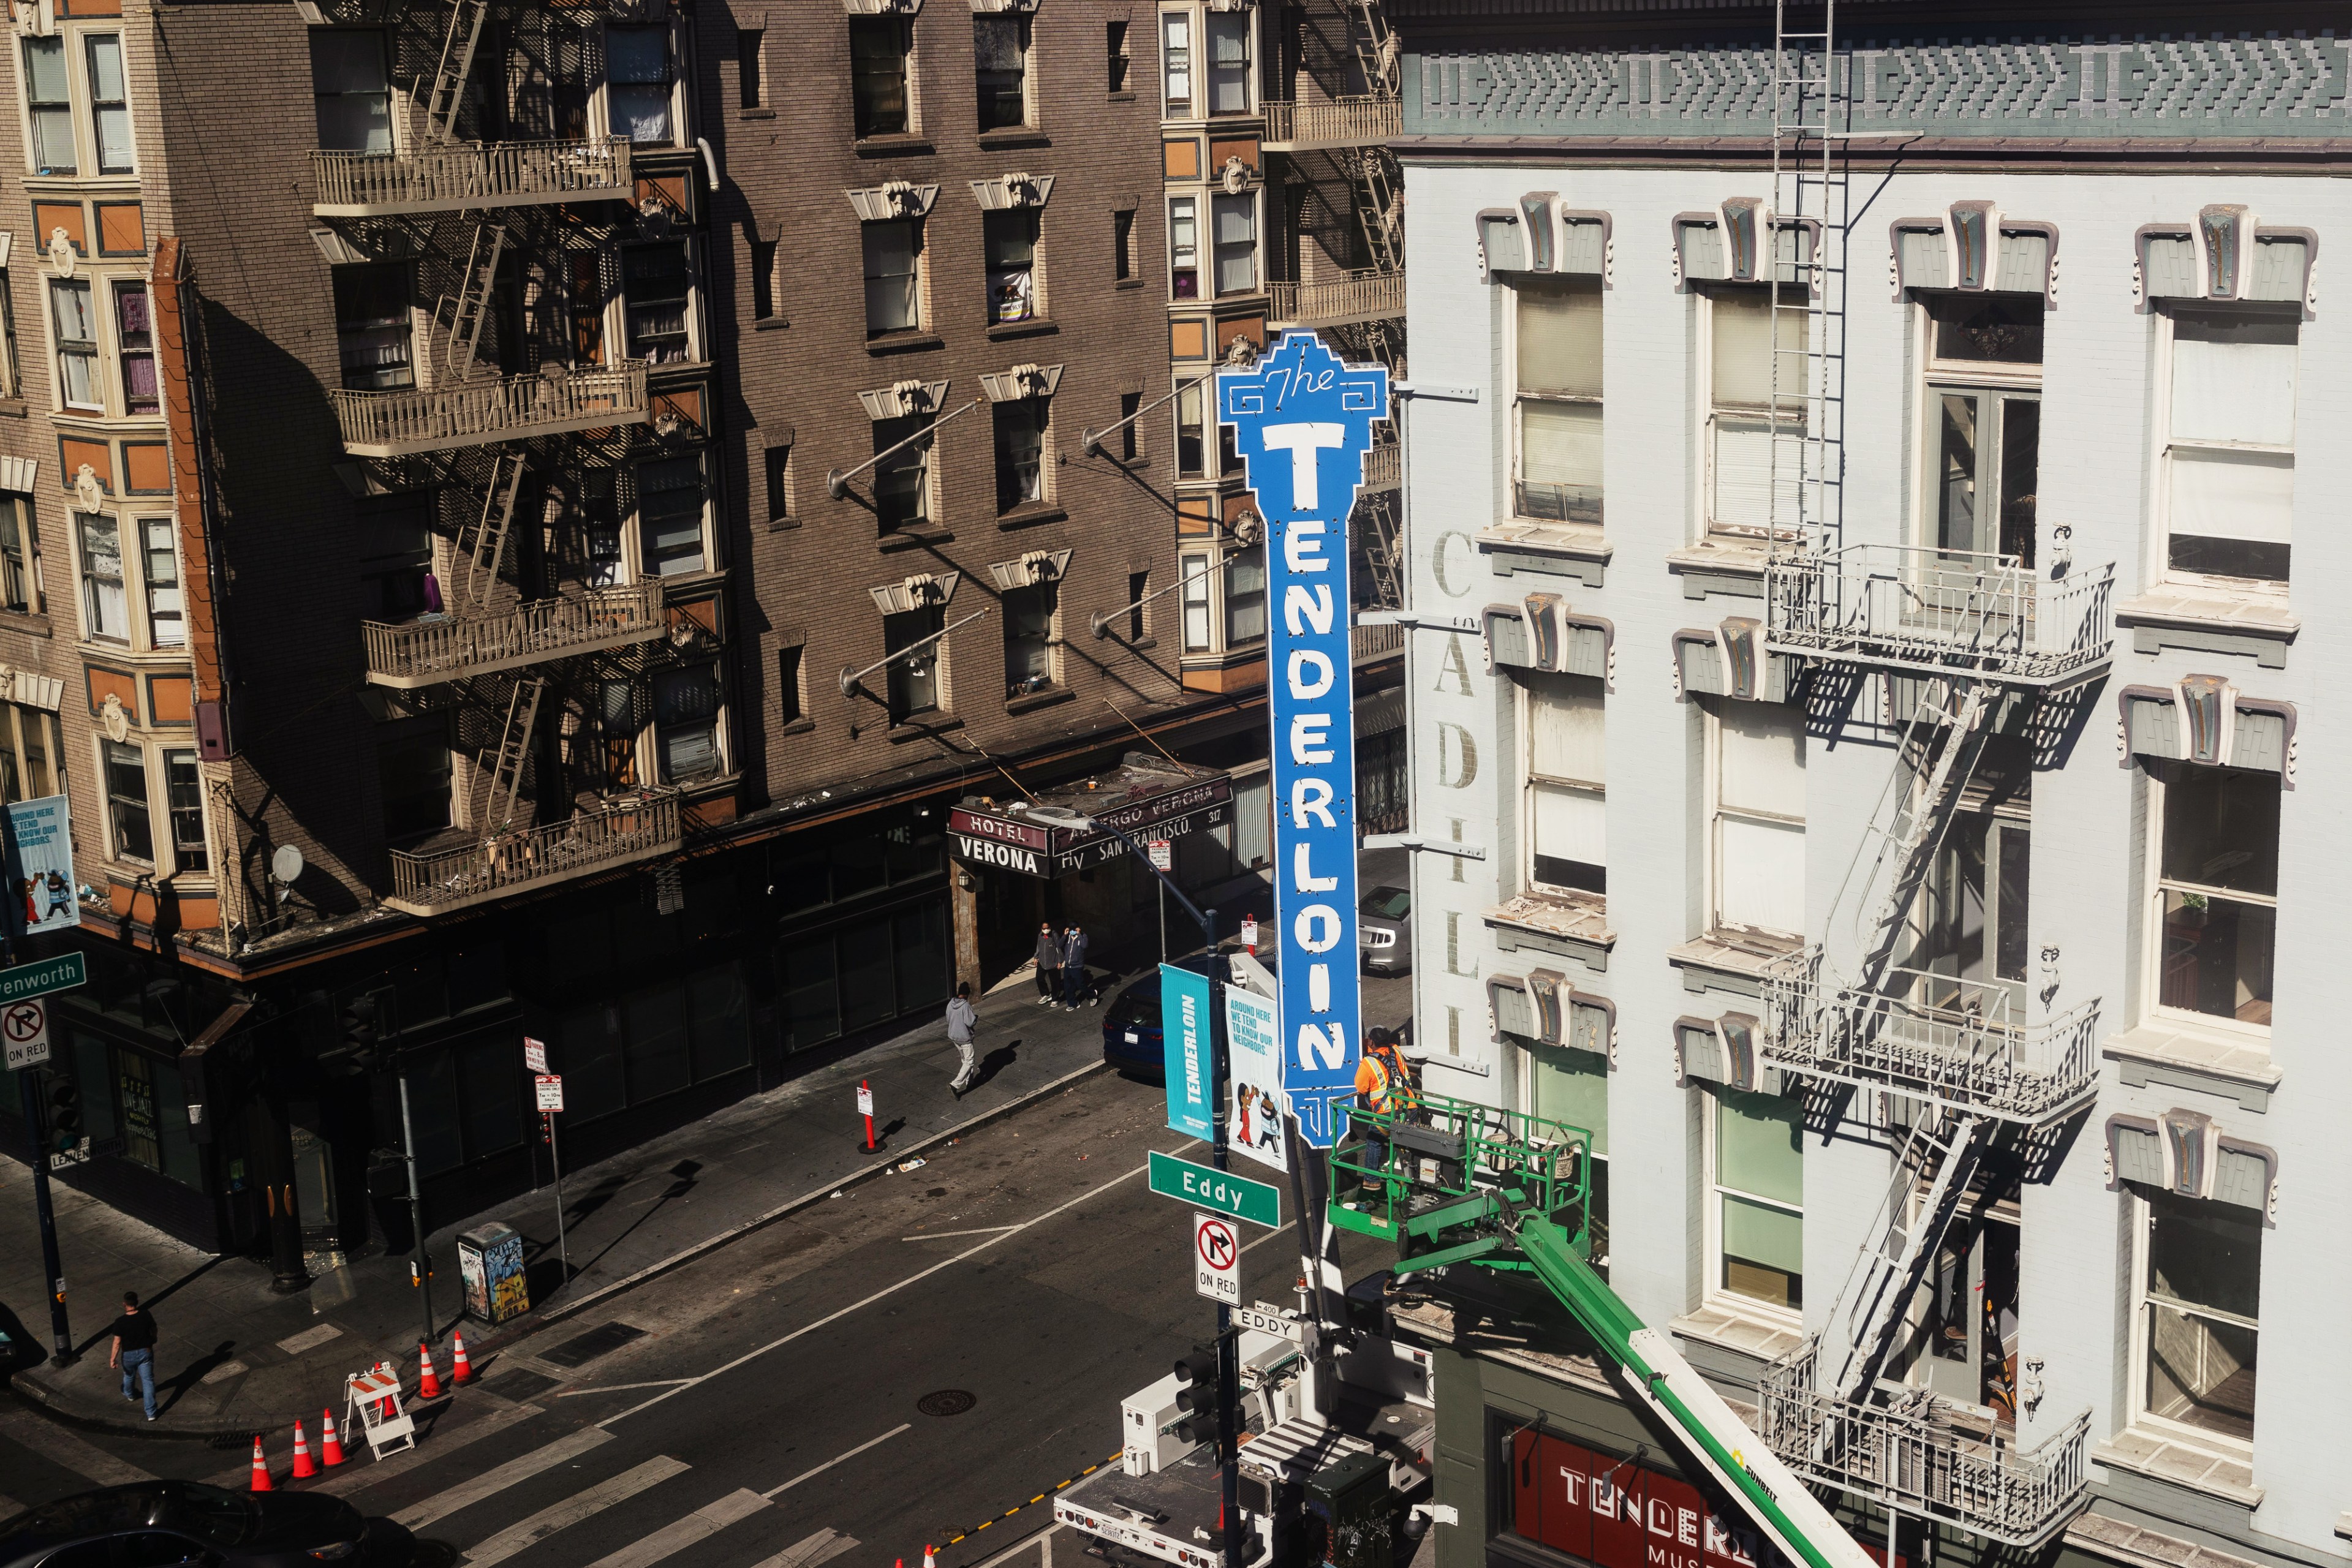 The Hamlin Hotel offers a bird's eye view of The Tenderloin, single-room-occupancy facility in San Francisco. From this vantage point, one can observe pedestrians leisurely walking down the streets, worker repairing the The Tenderloin sign. 